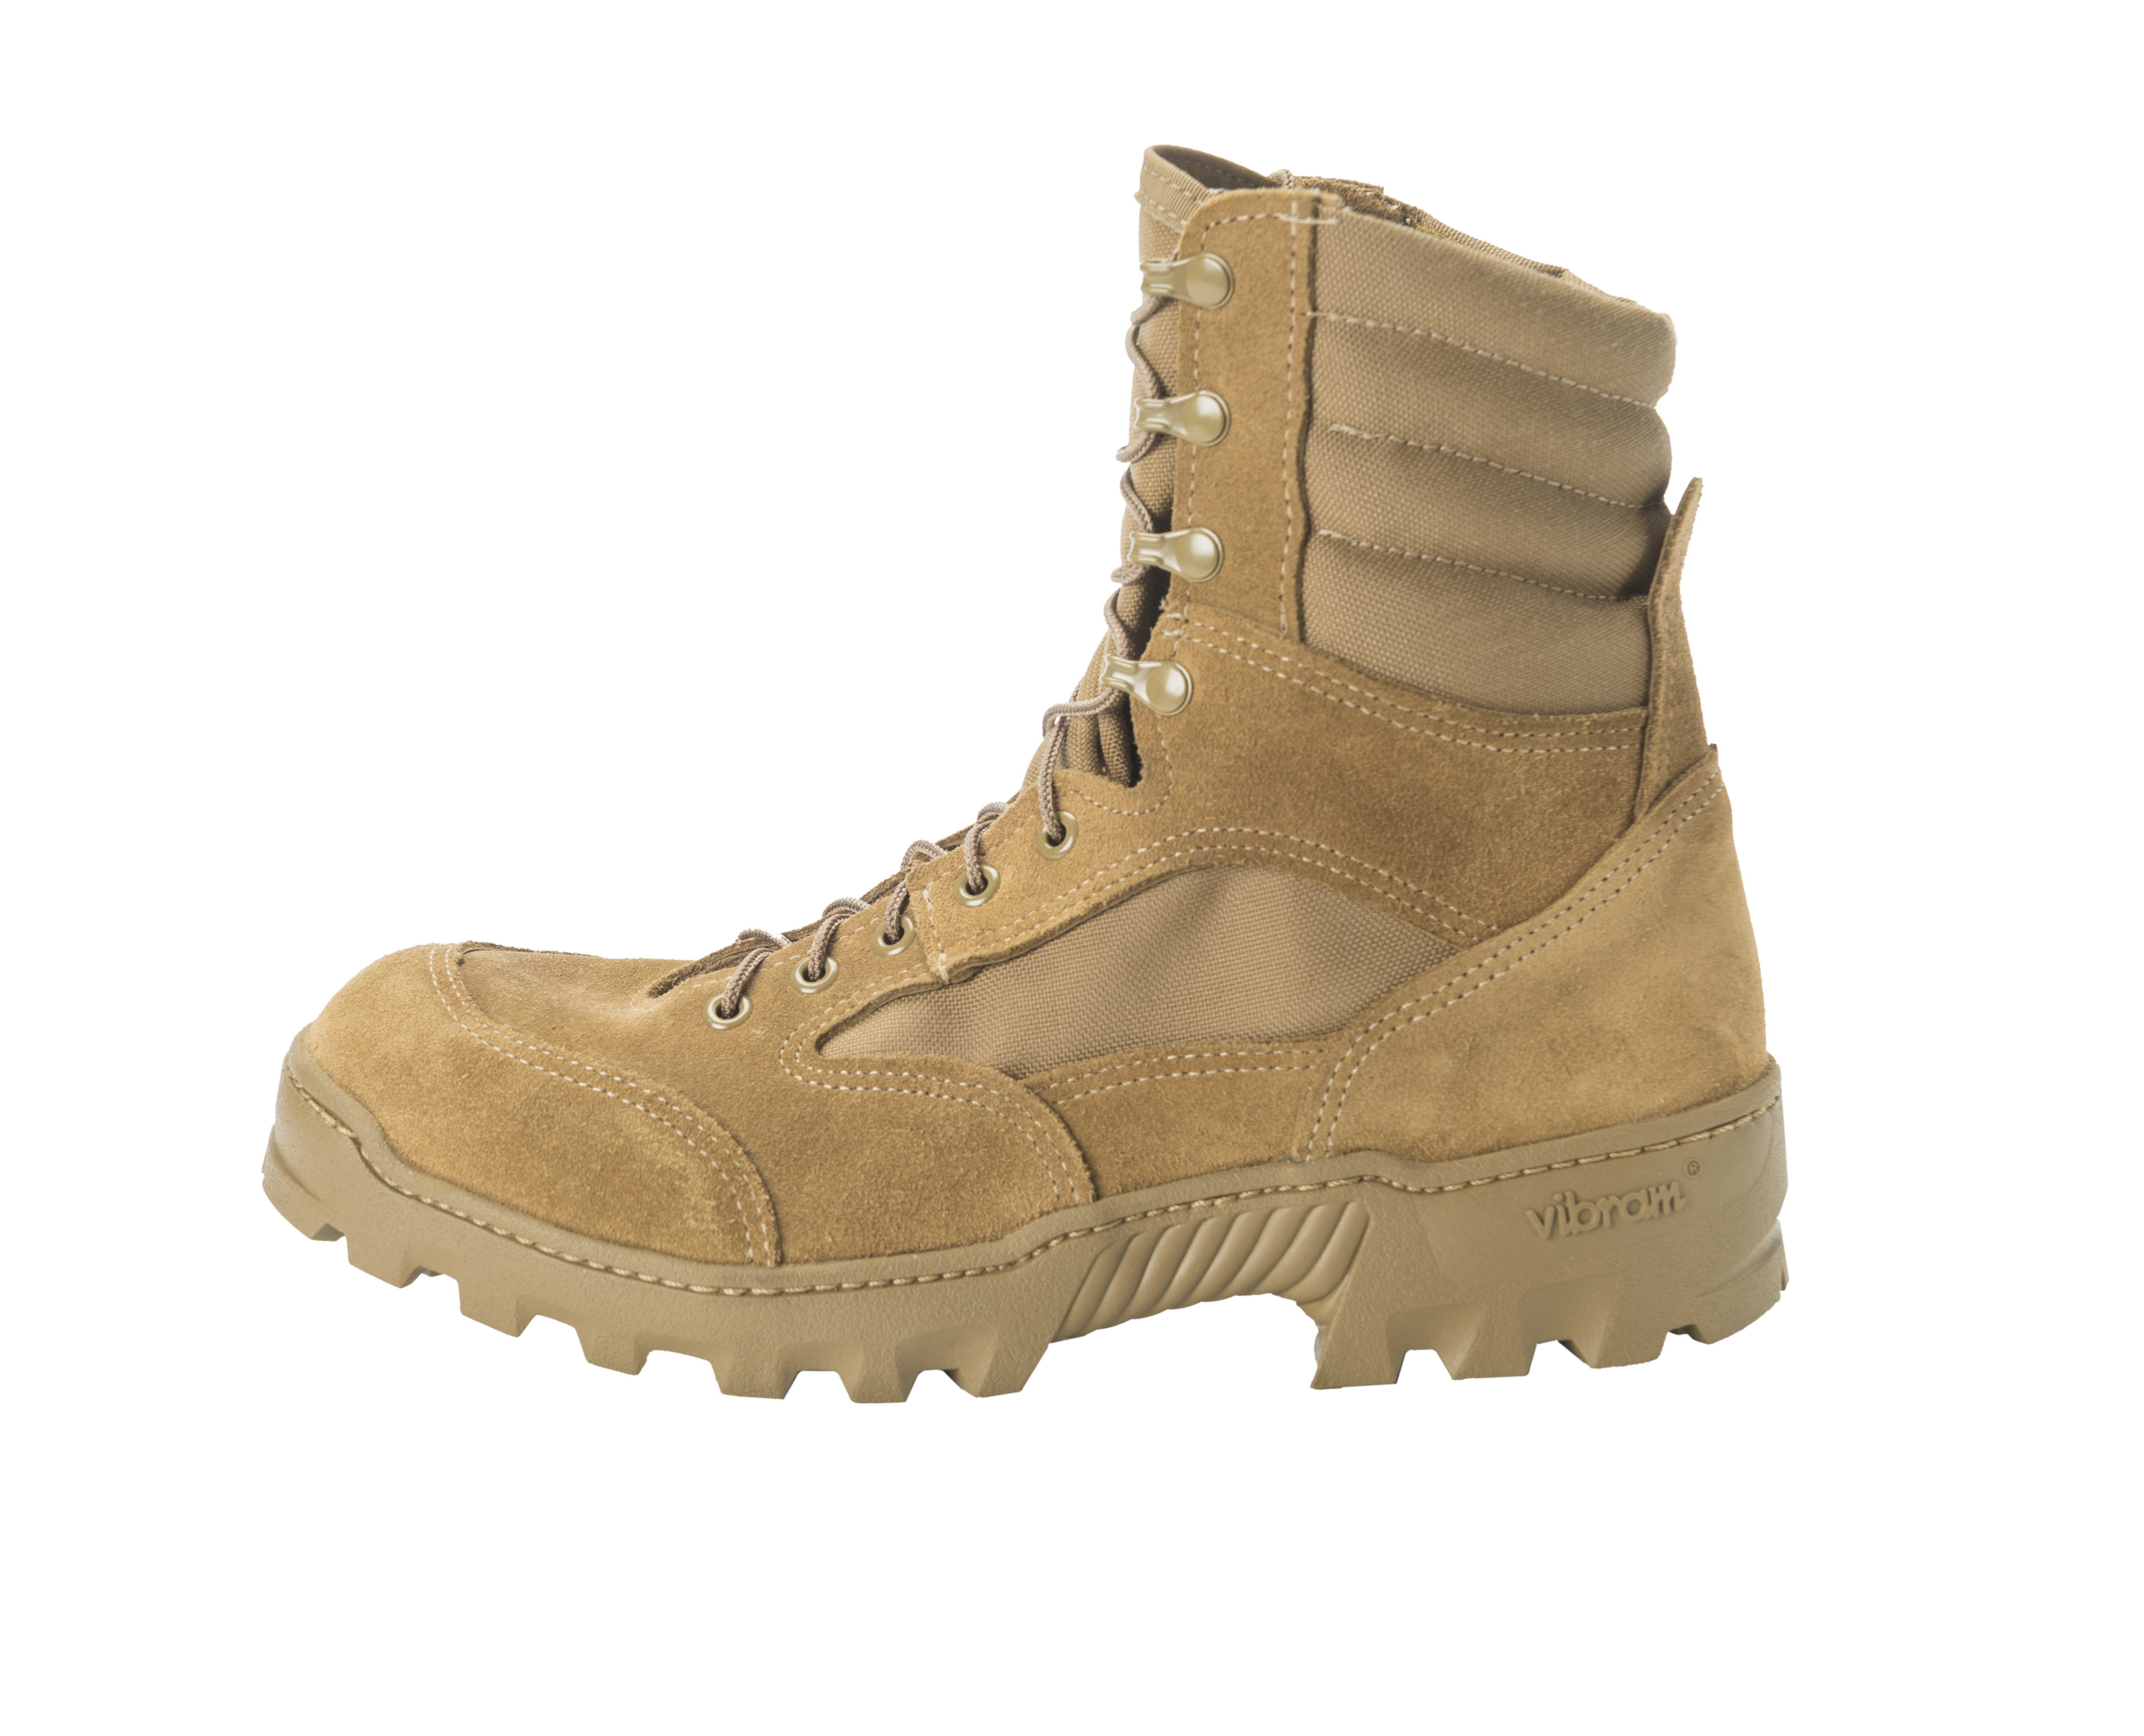 army basic issue boots